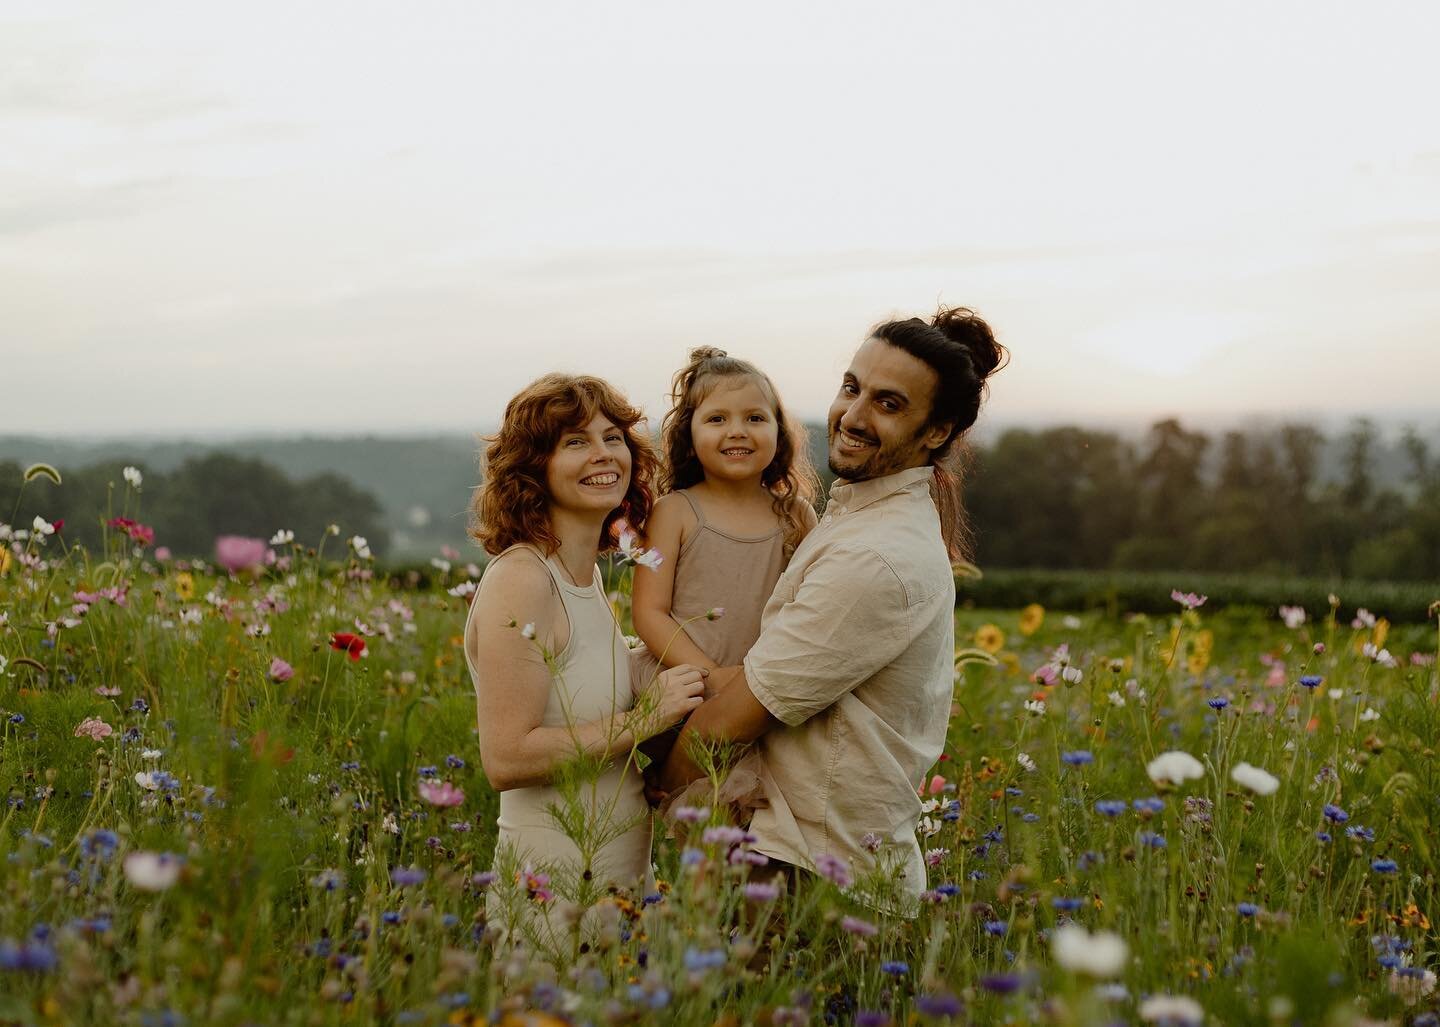 Me and my fam from last year&rsquo;s Wildflower Mini Sessions 🌸 The booking link for this year&rsquo;s minis drops for early birds tomorrow, and everyone else Monday! There&rsquo;s still time to get on the early bird list by either sending me a mess